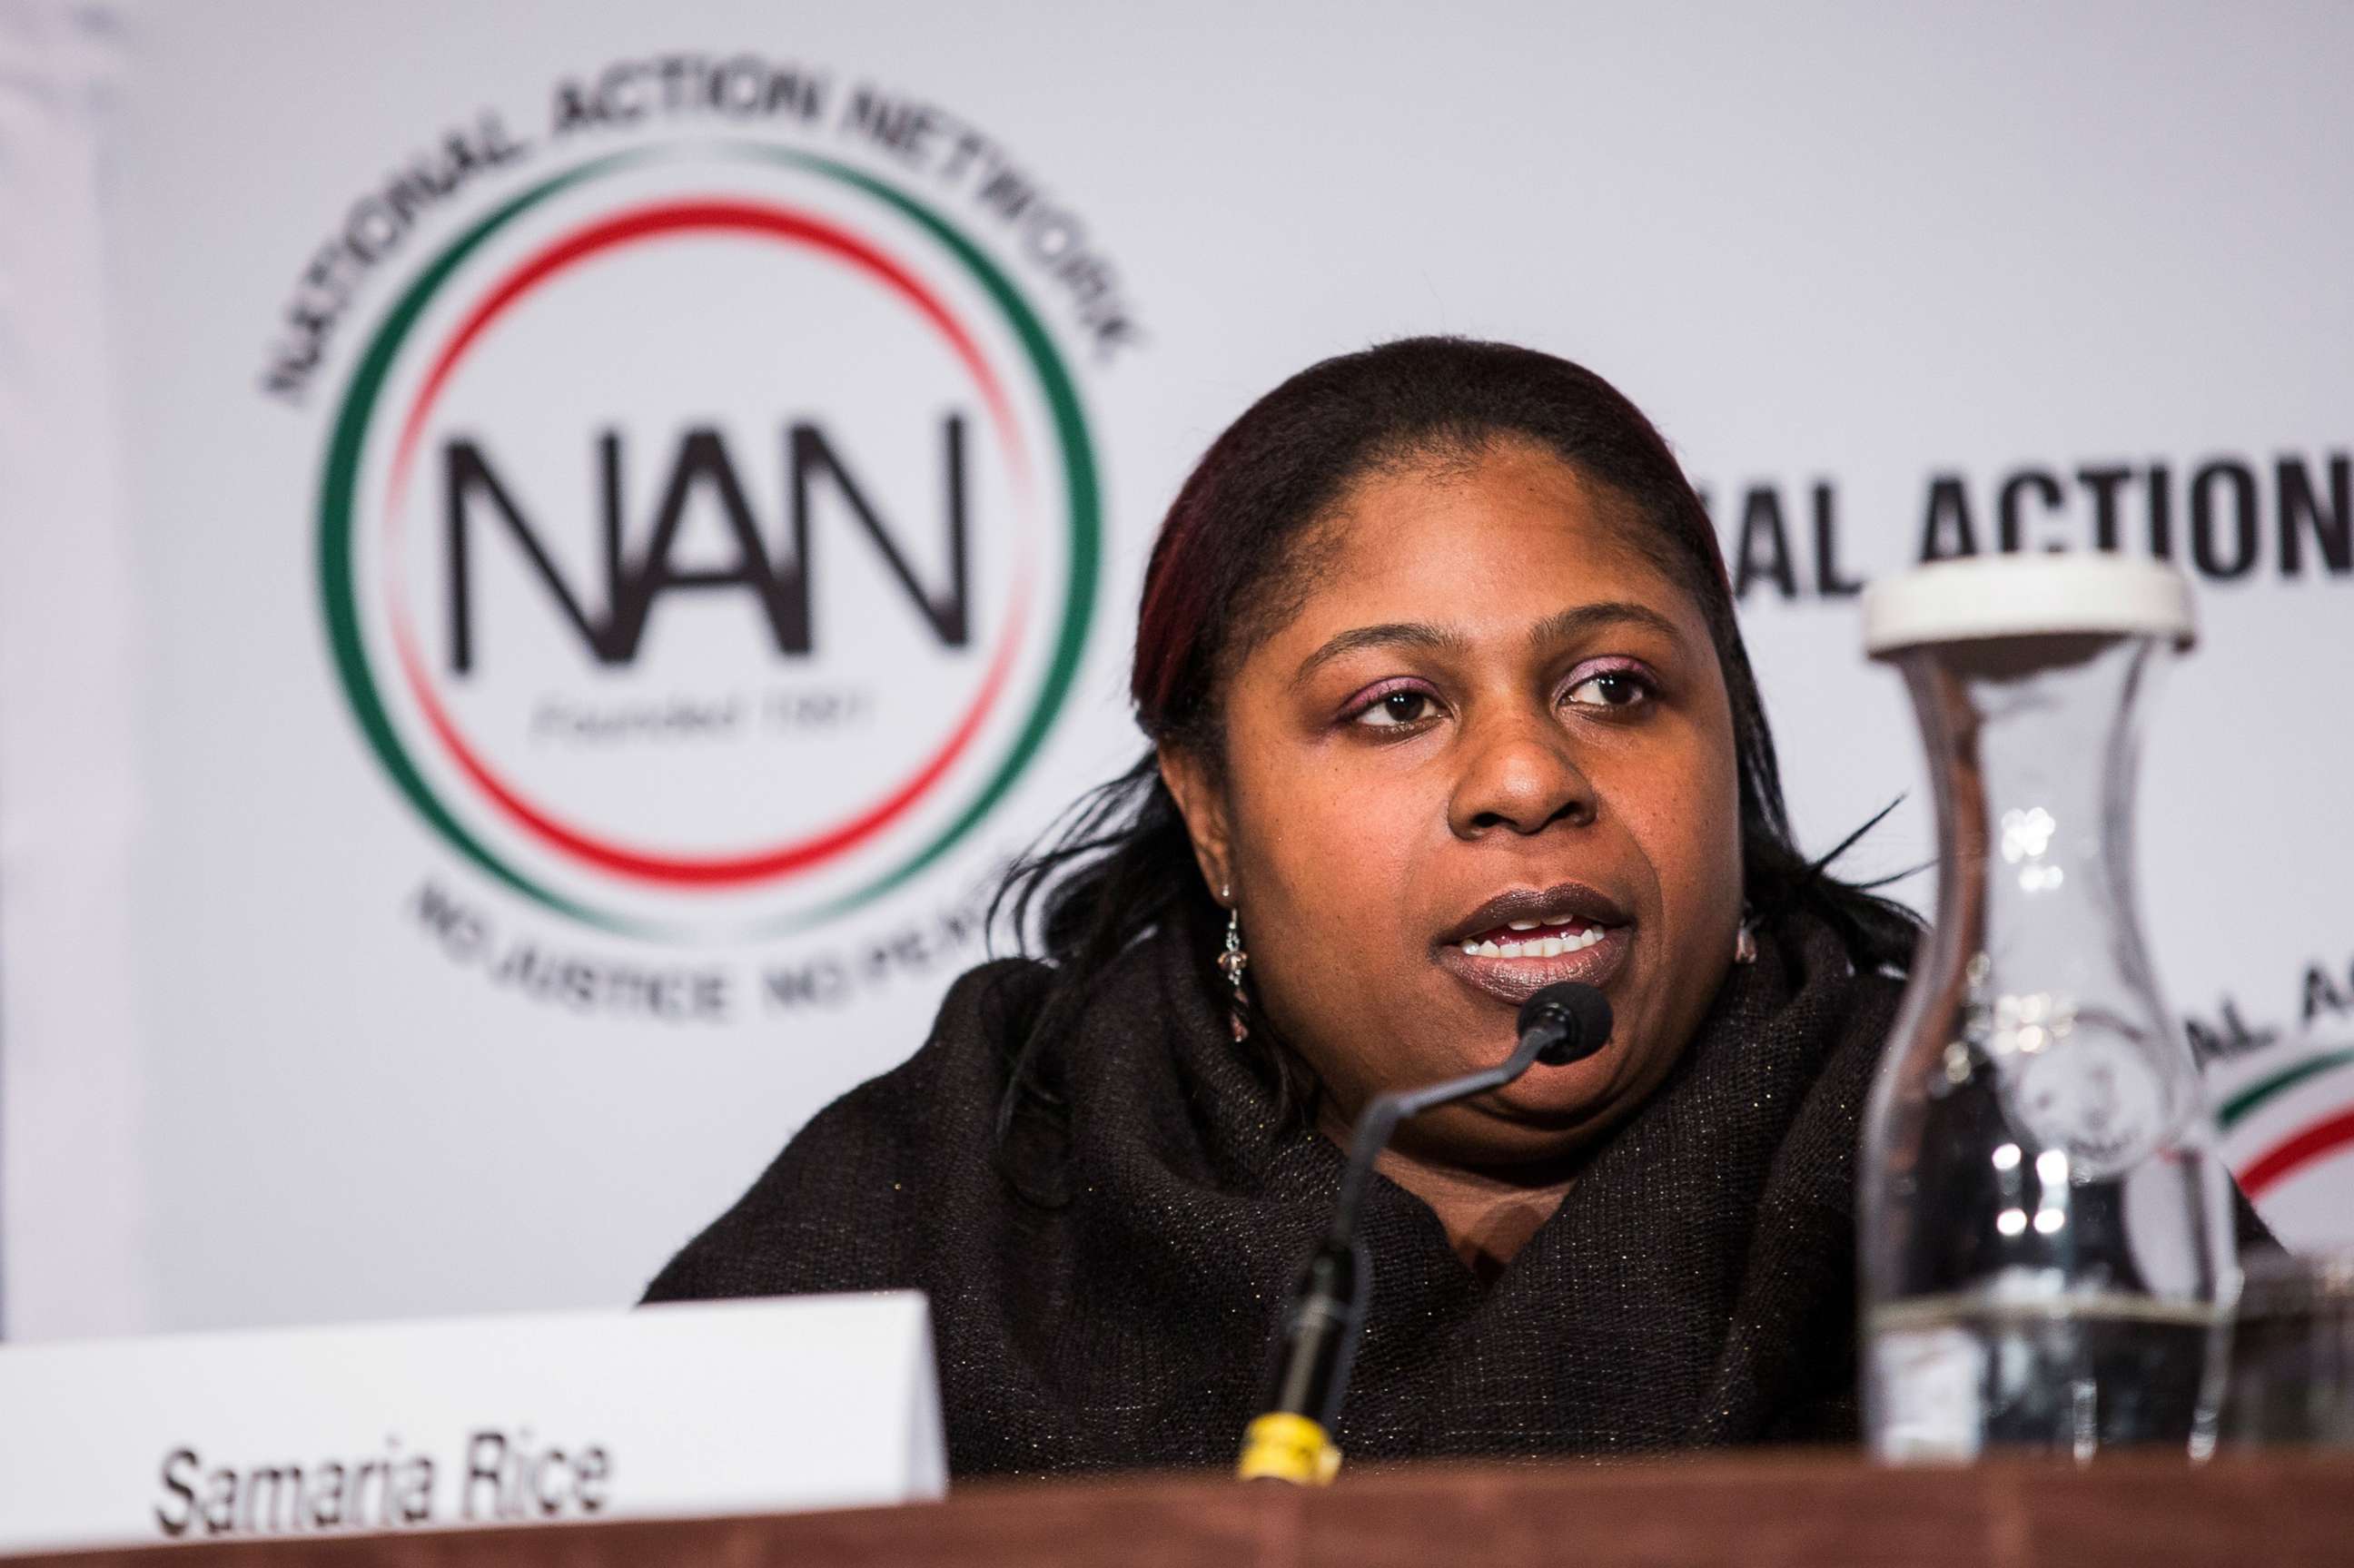 PHOTO: Samaria Rice, mother of Tamir Rice, who was shot to death by a police officer, spoke at the National Action Network (NAN) national convention, April 8, 2015 in New York.